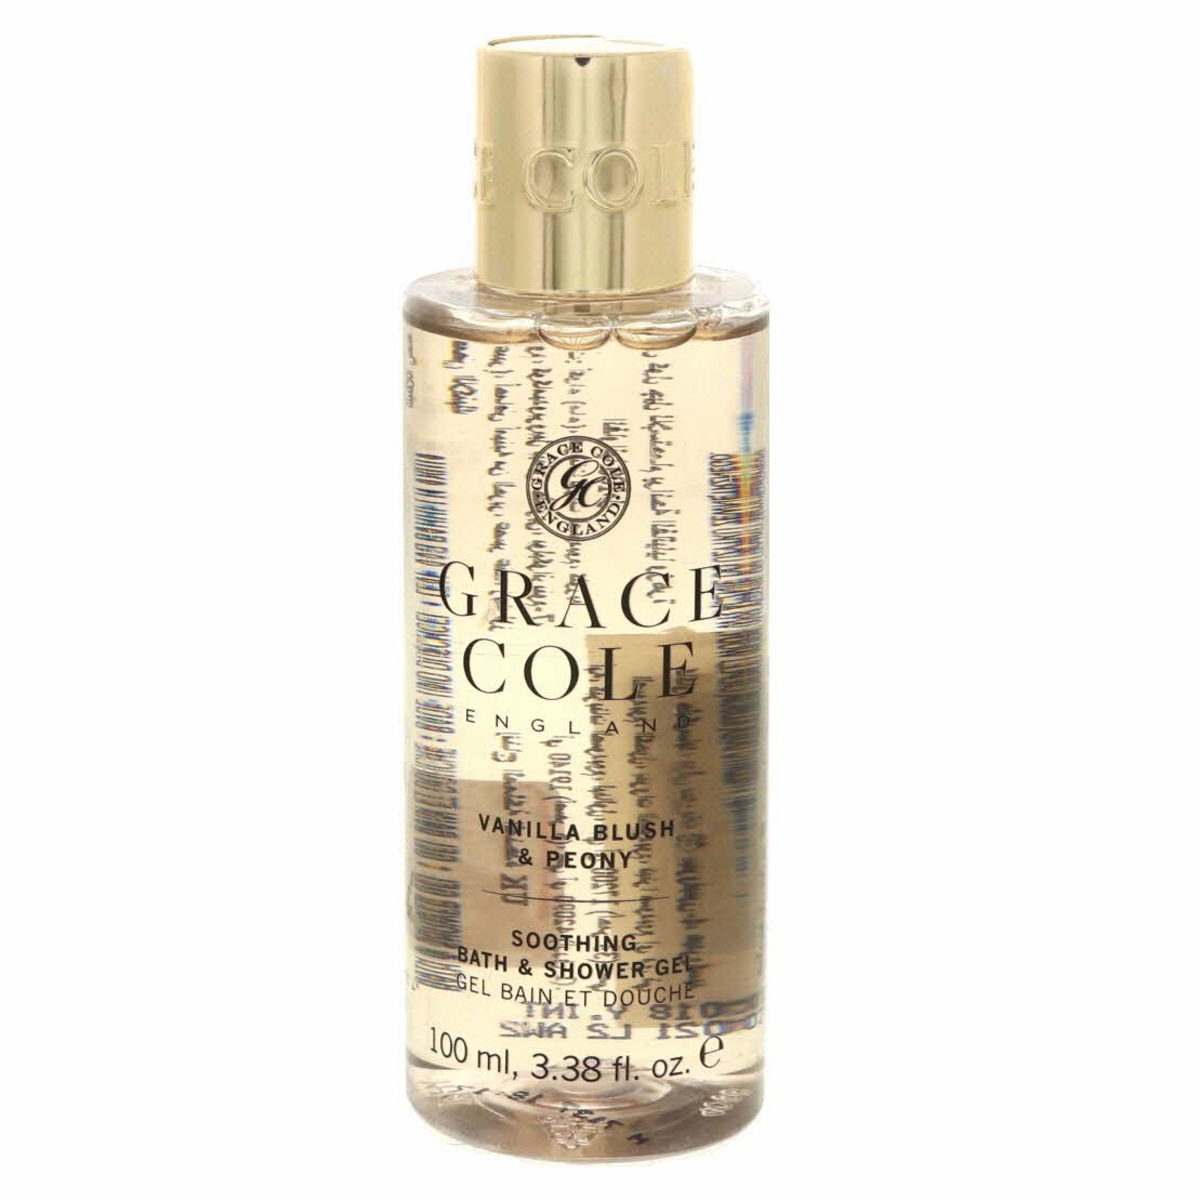 Grace Cole Soothing Bath And Shower Gel Vanilla Blush And Peony 100ml